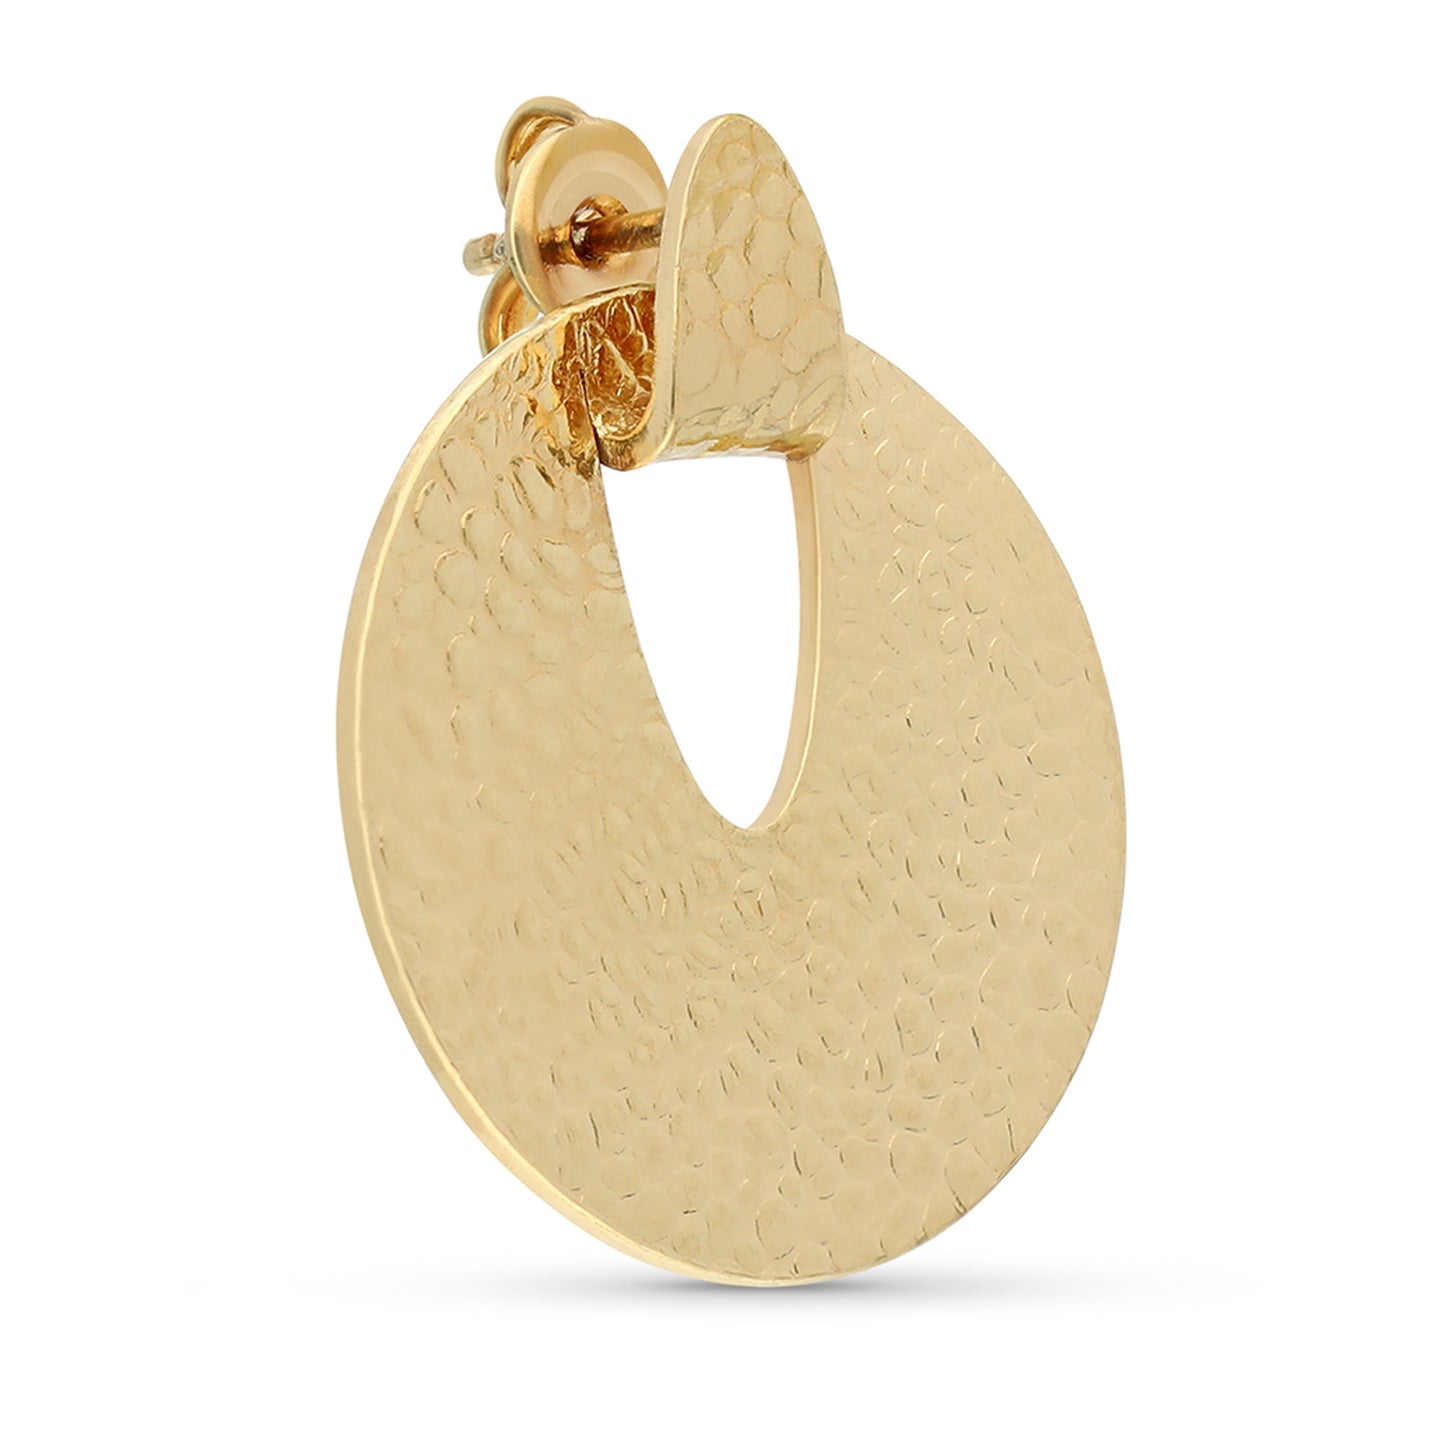 18kt Yellow Gold On Bronze Pebbled Round Disc Stud